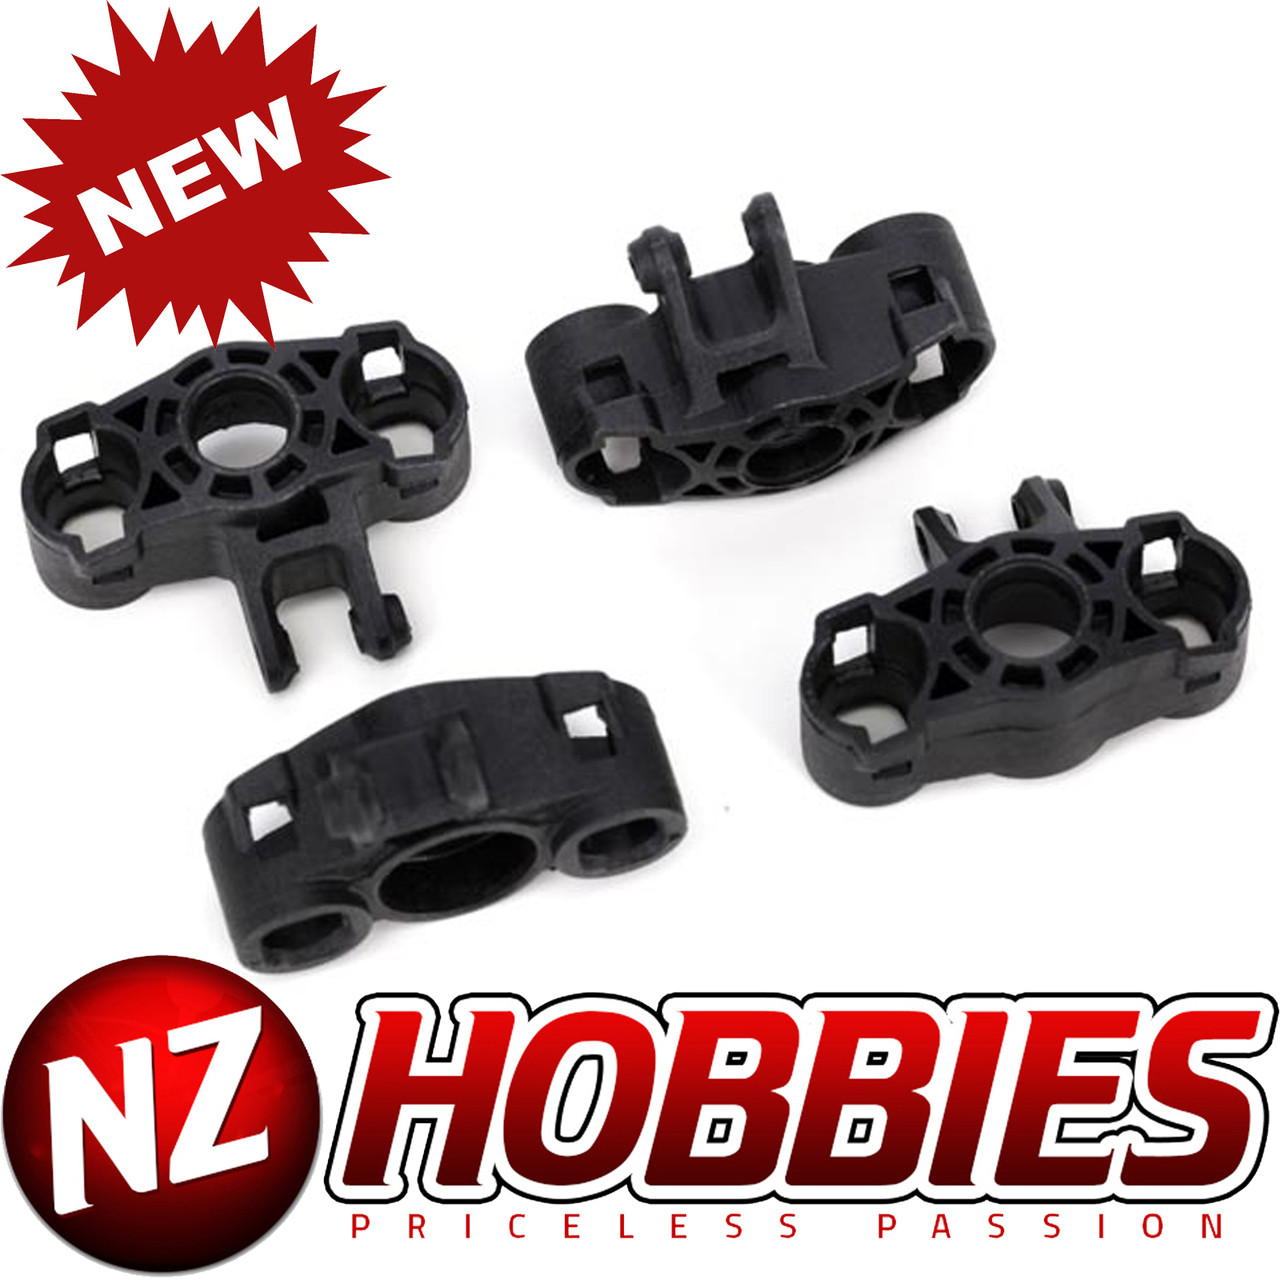 2 each Traxxas 7034 Left and Right Axle Carriers